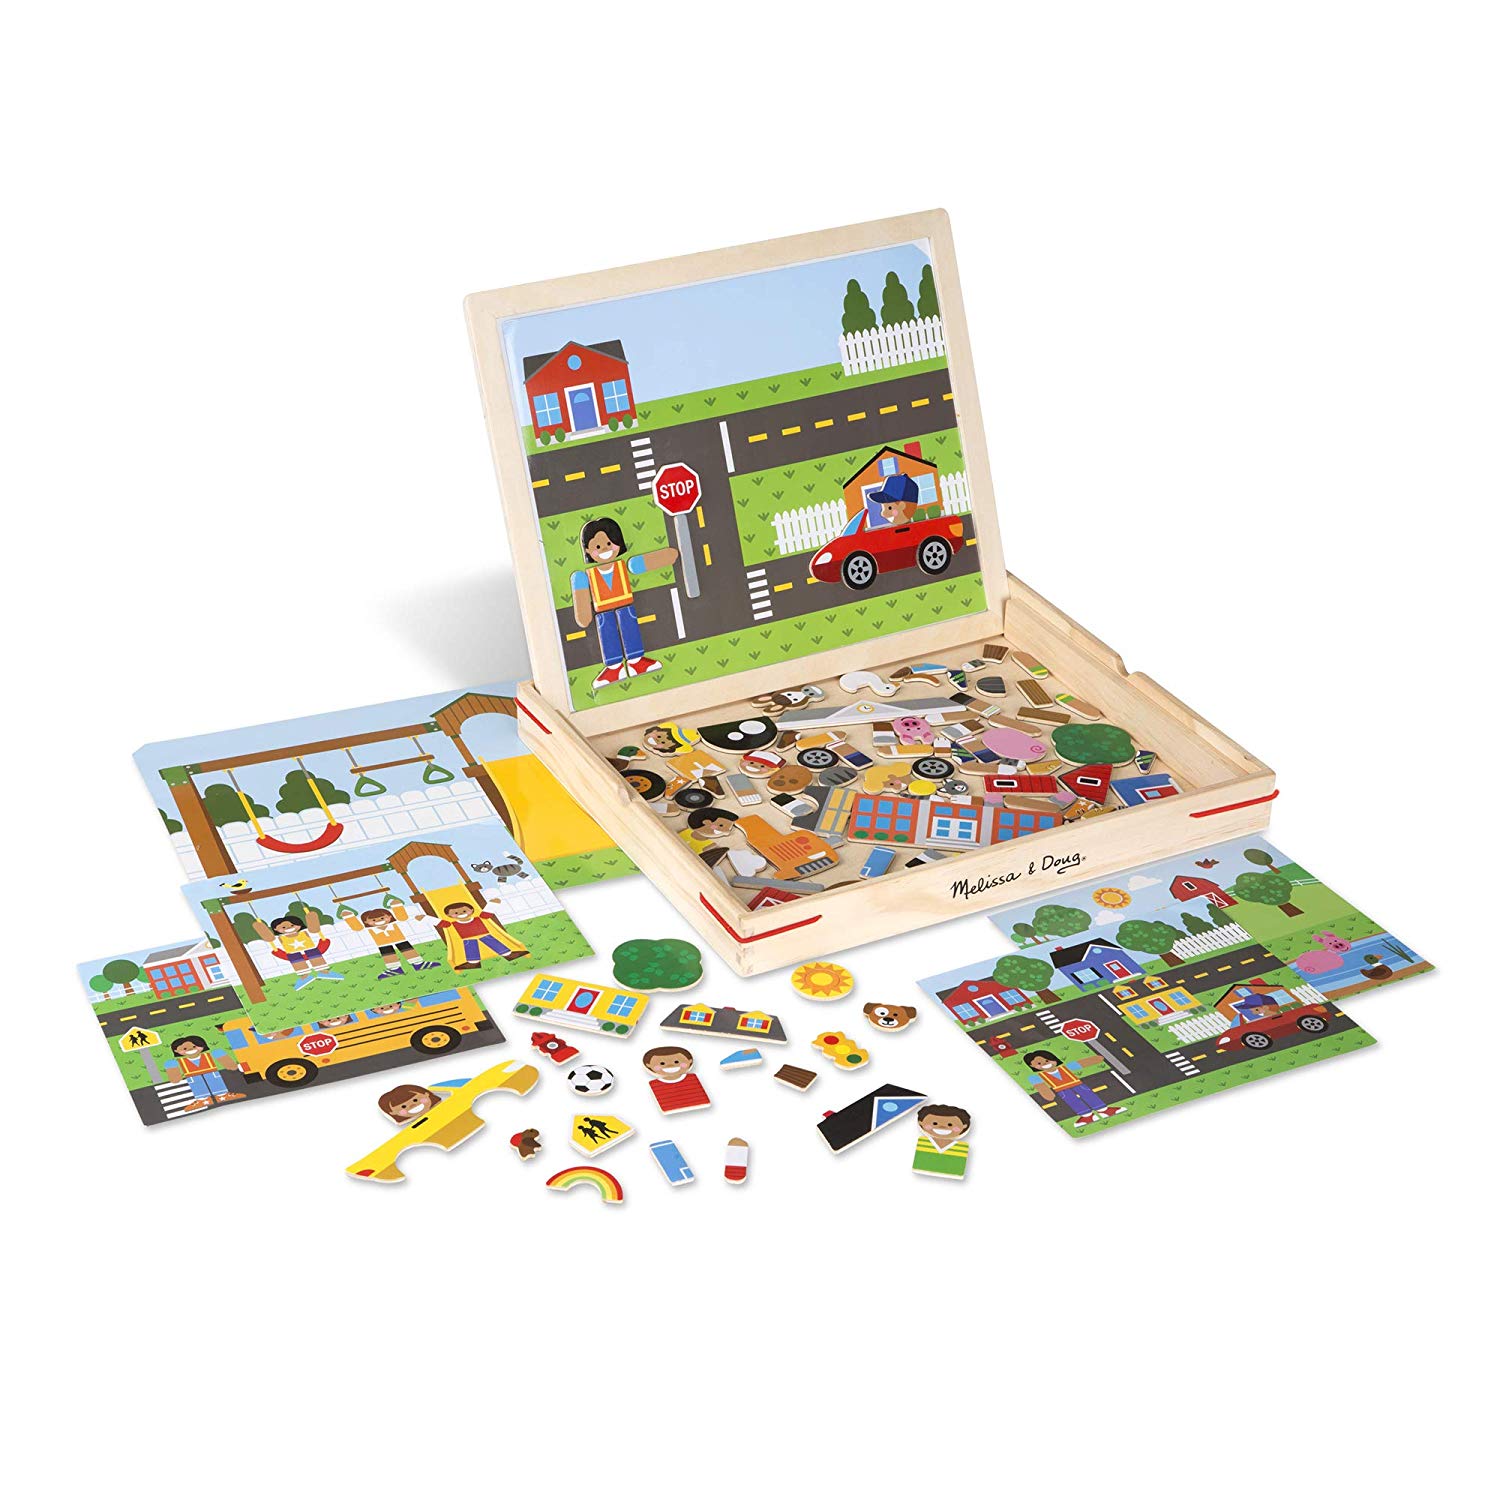 Melissa & Doug 19918 119 Scene Wooden Magnetic Matching Game Cards, Multi-C